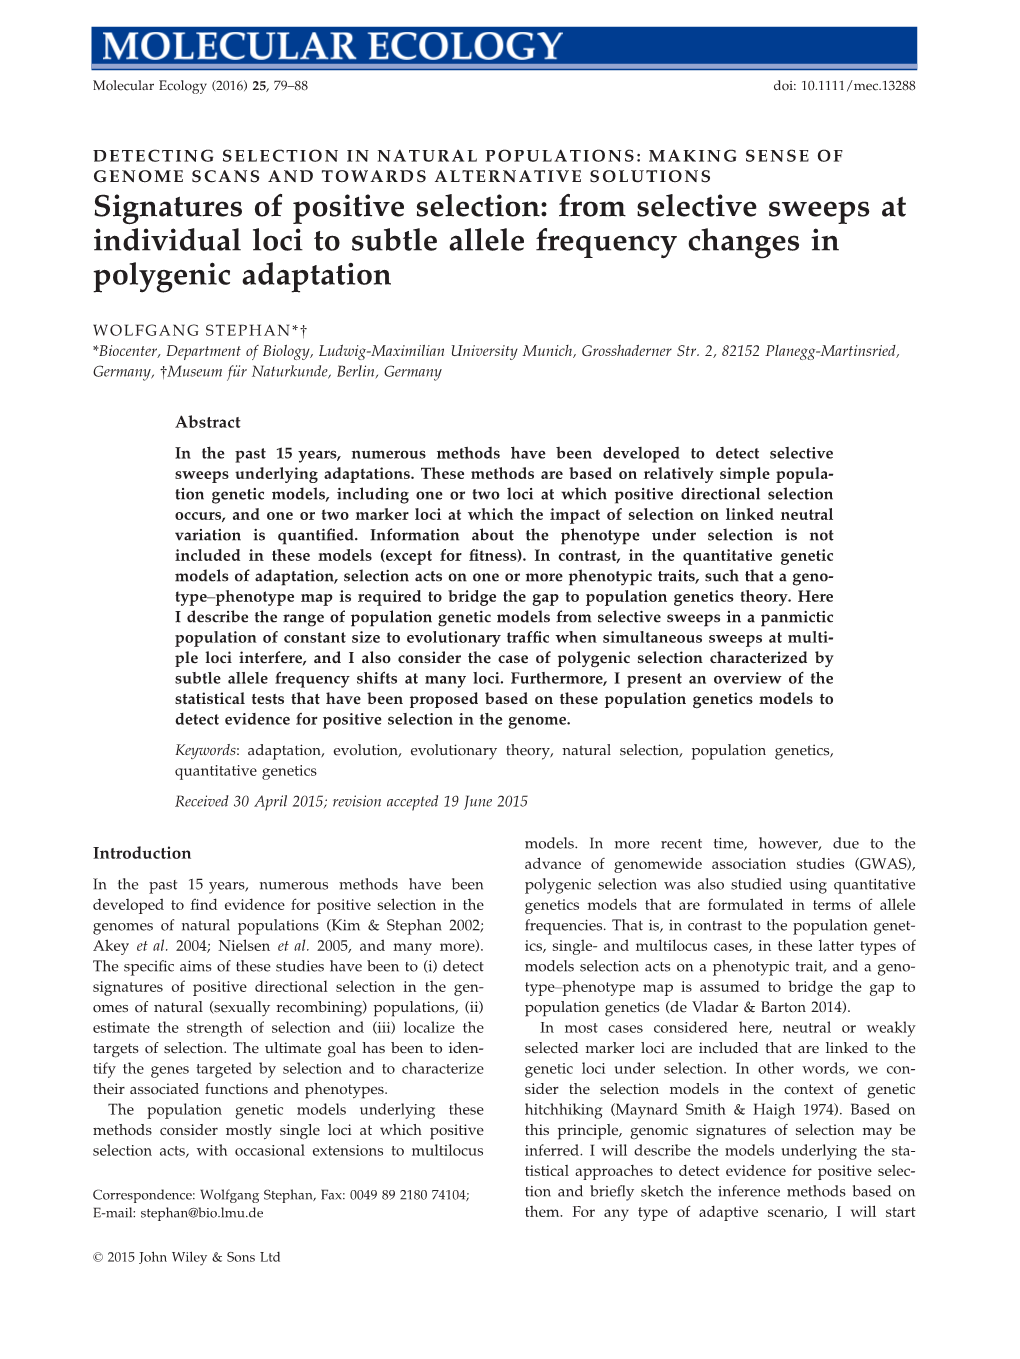 Signatures of Positive Selection: from Selective Sweeps at Individual Loci to Subtle Allele Frequency Changes in Polygenic Adaptation